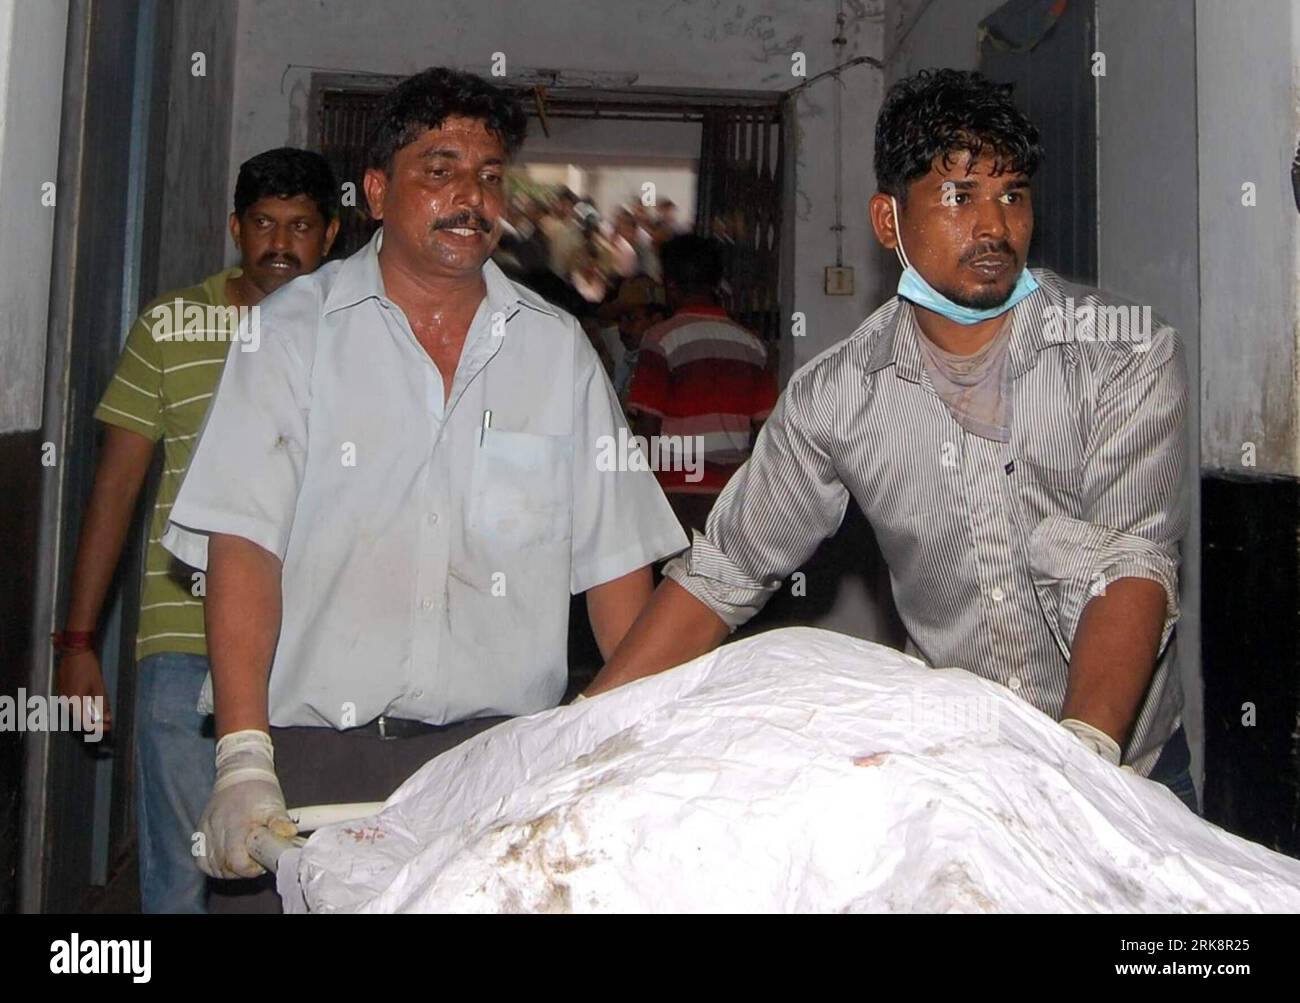 Bildnummer: 54068843  Datum: 22.05.2010  Copyright: imago/Xinhua (100522) -- MANGALORE, May 22, 2010 (Xinhua) -- The body of a victim in a plane crash is carried to a hospital for identification in the southern Indian city of Mangalore, May 22, 2010. A total of 158 of all 166 on board the plane of Air India Express were confirmed dead in the crash when it was landing at an airport in Mangalore early Saturday. The plane was flying from Dubai of the United Arab Emirates to Mangalore. (Xinhua) (ypf) (4)INDIA-MANGALORE-PLANE CRASH-VICTIM-IDENTIFICATION PUBLICATIONxNOTxINxCHN Indien Unglück Flugzeu Stock Photo